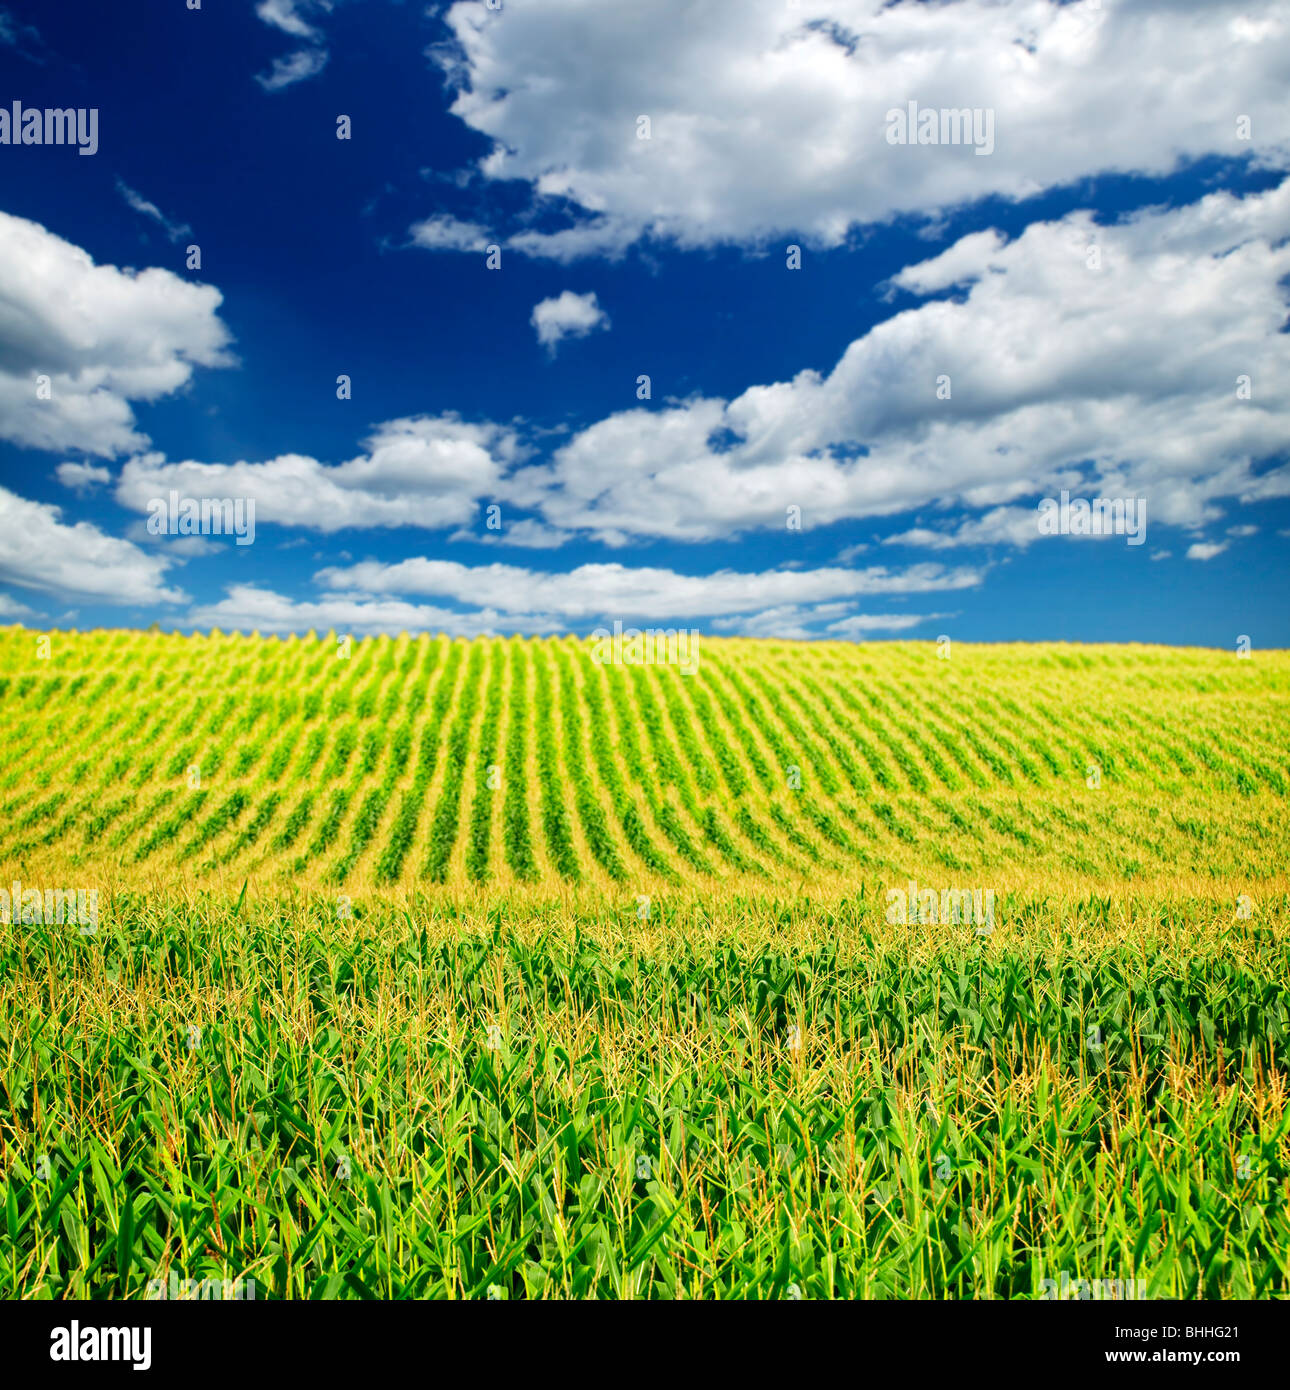 Agricultural landscape of corn field on small scale sustainable farm Stock Photo